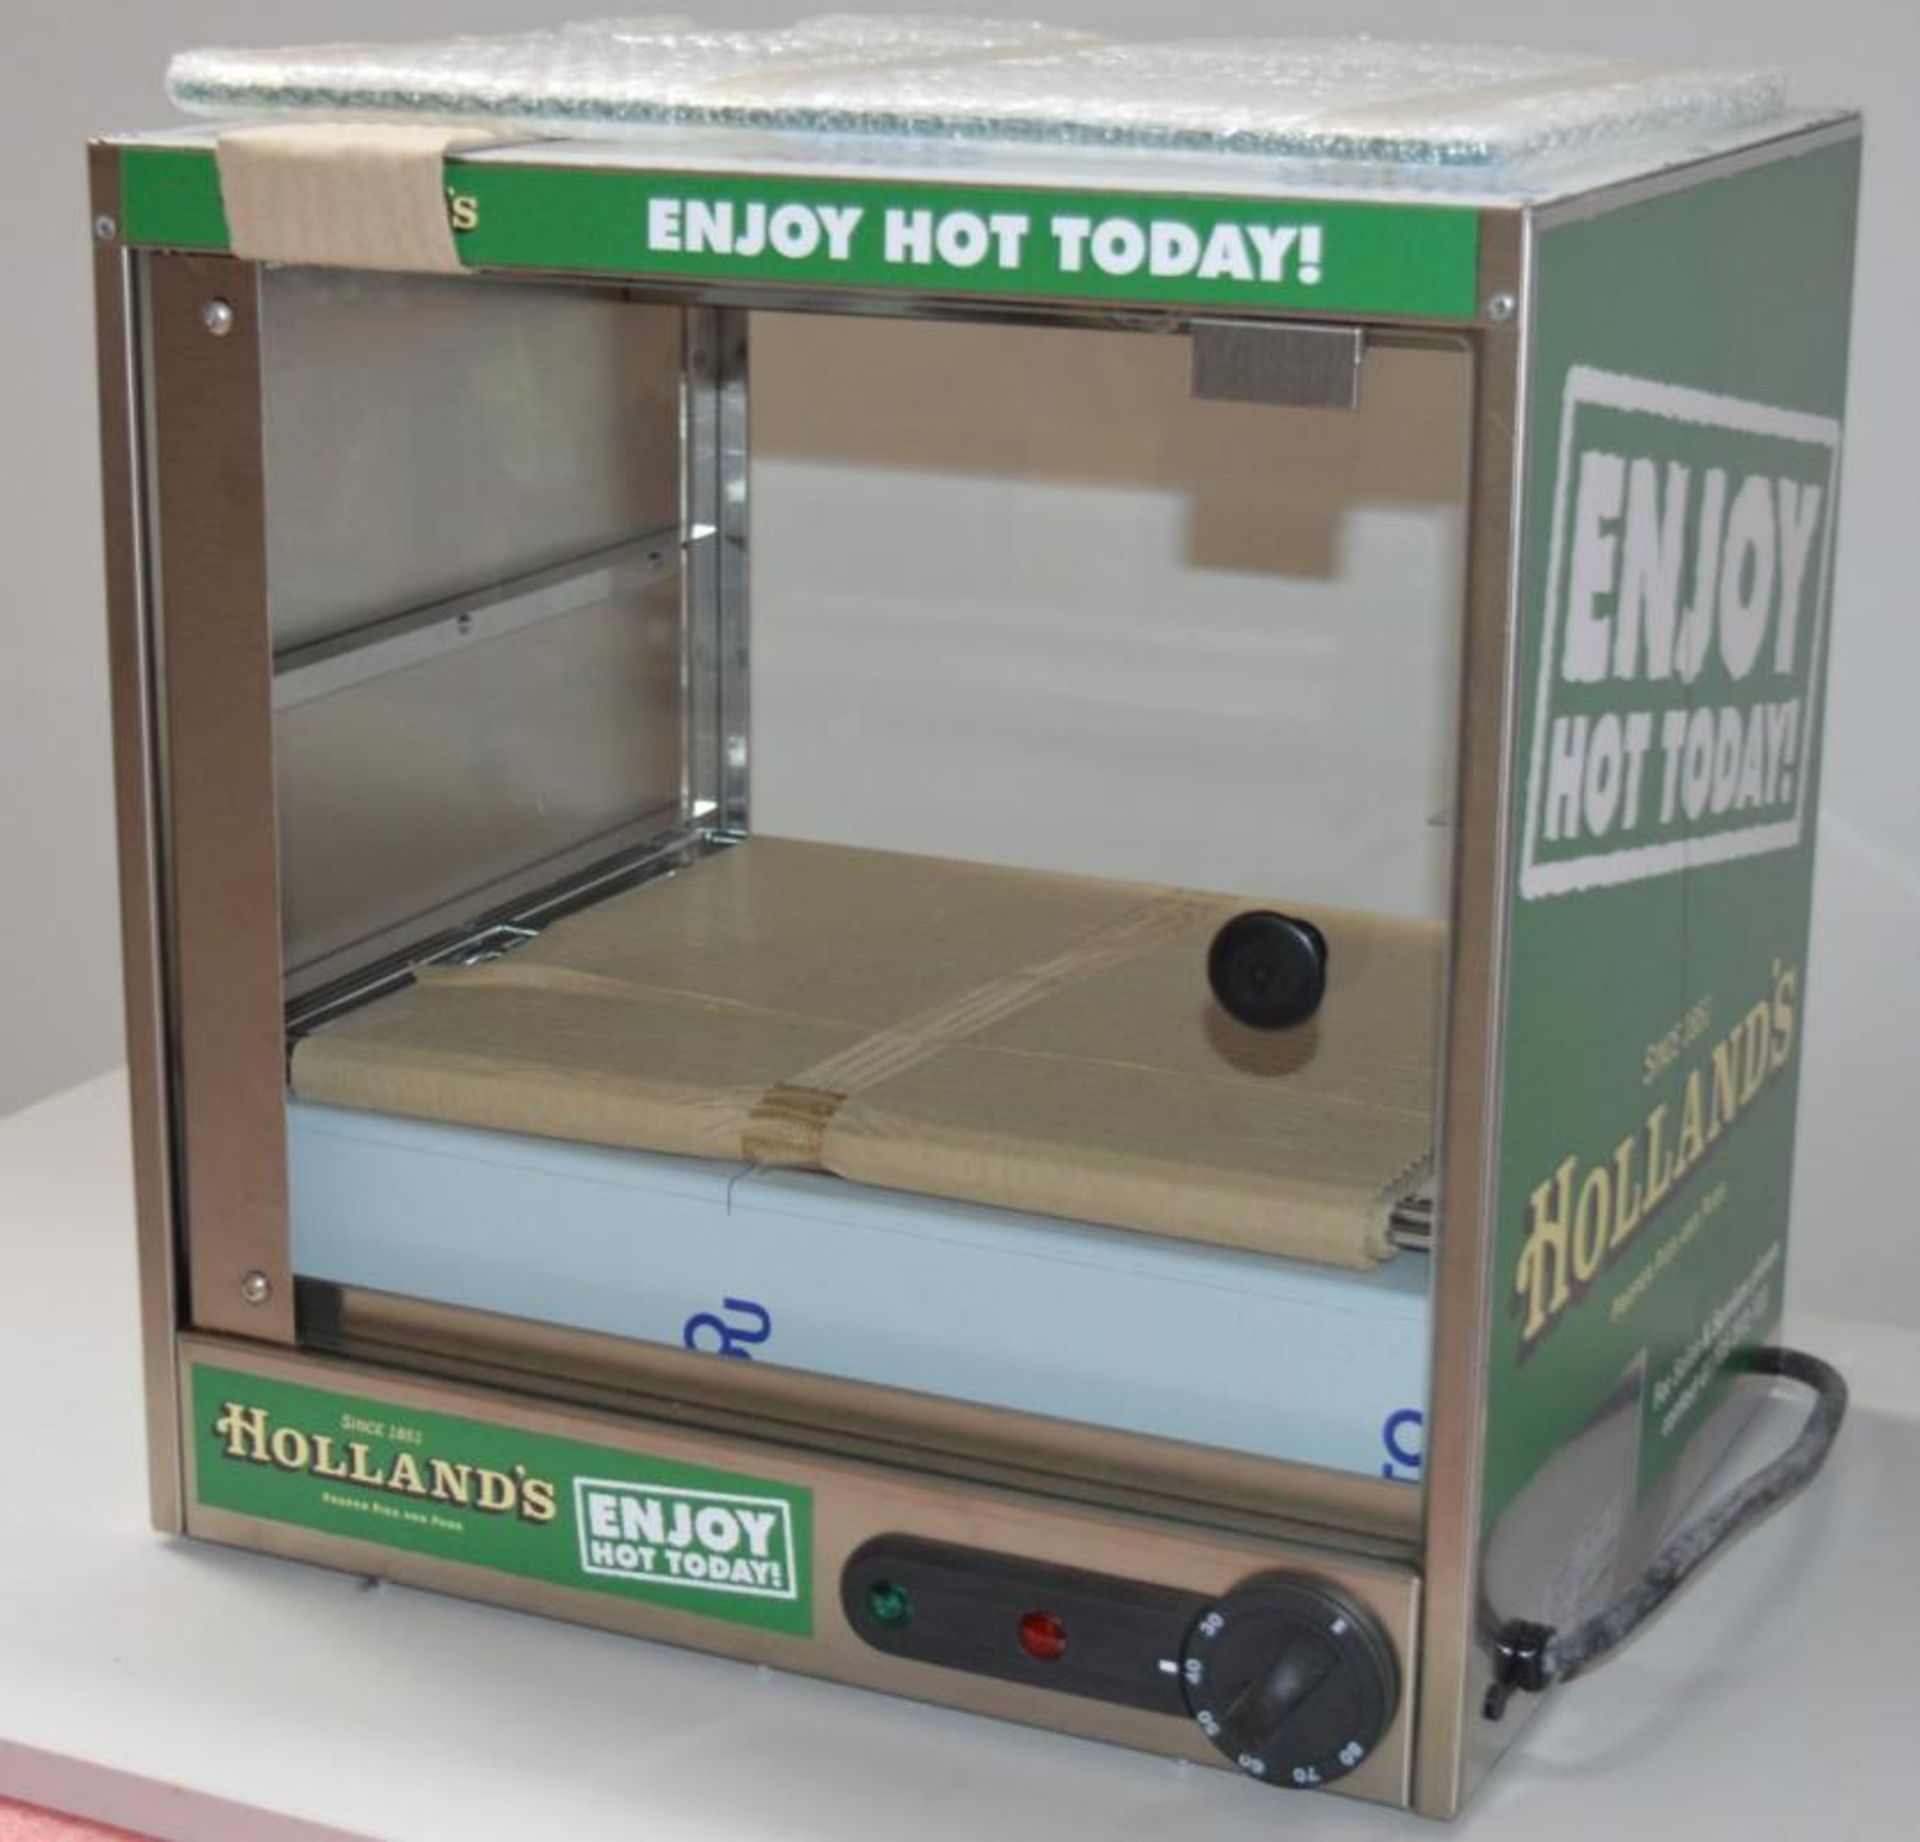 1 x Parry Electric Pie Warming Cabinet - Hollands Pie Edition - New and Unused - Features - Image 7 of 9